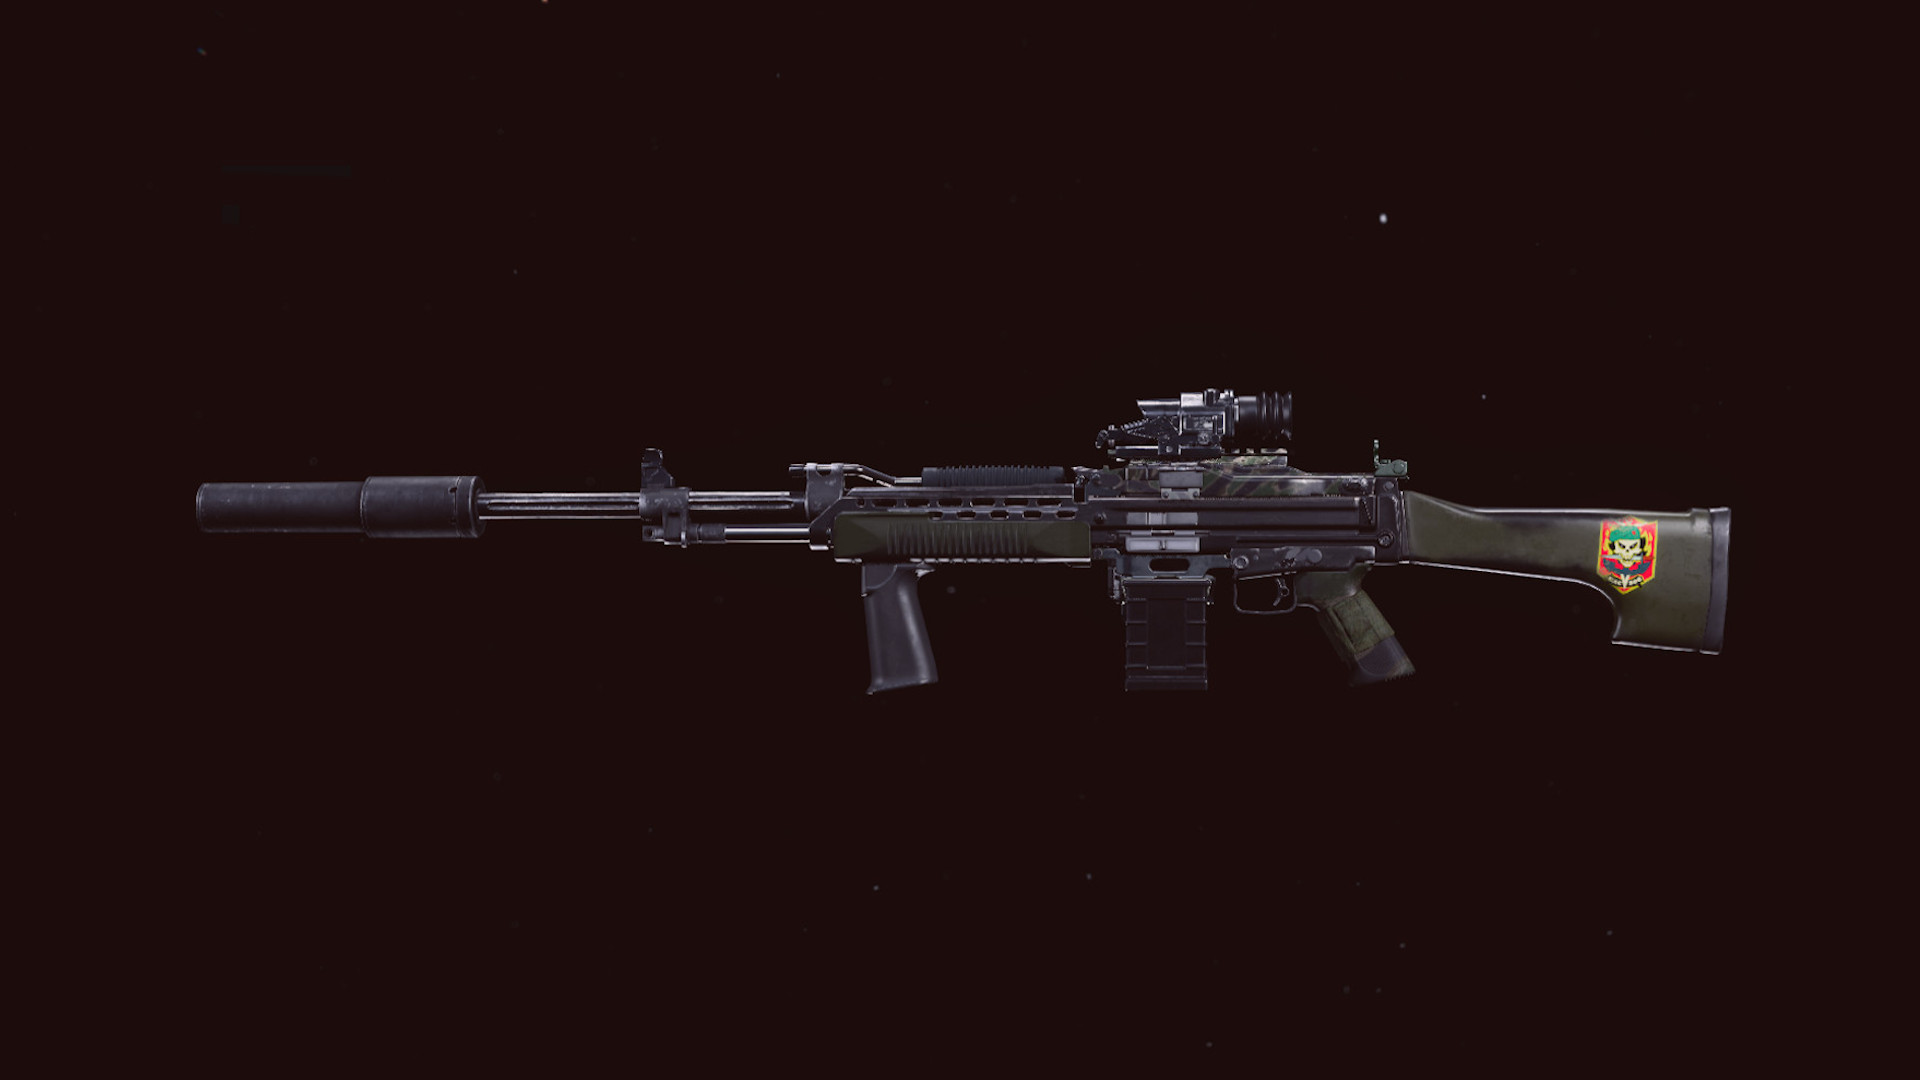 Best Warzone Iron Trials loadouts: A Stoner 63 gun against a black background.